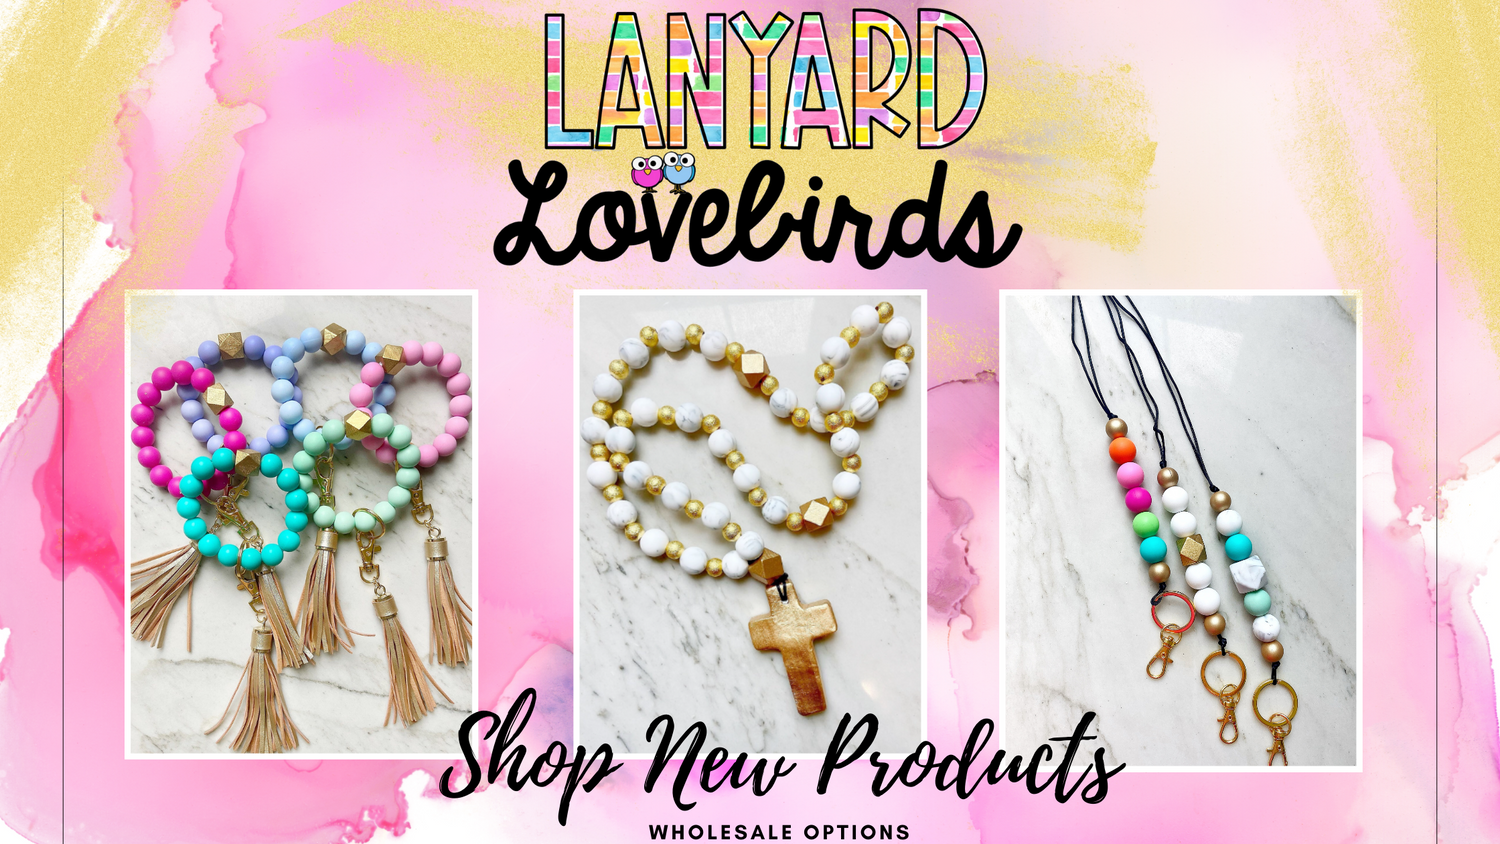 lanyard lovebirds, accessories, lanyards, Owristband Keychains, Keychains, prayer beads, home decor, images, pictures, show now, new products